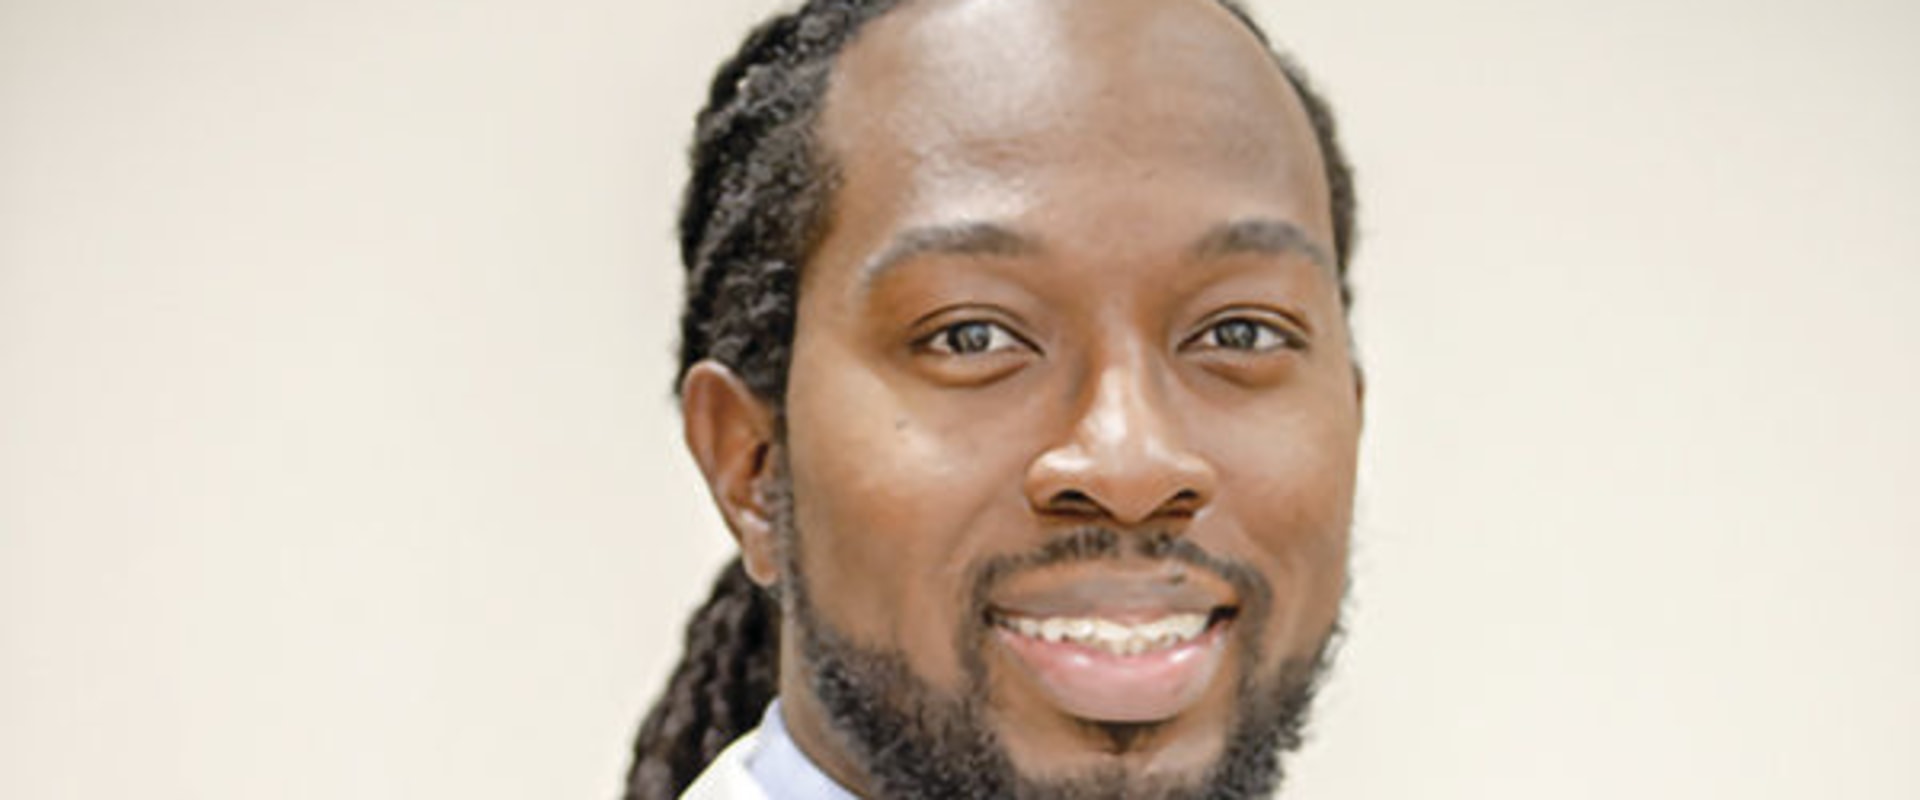 The Impact of Black Male Primary Care Physicians on Health Outcomes